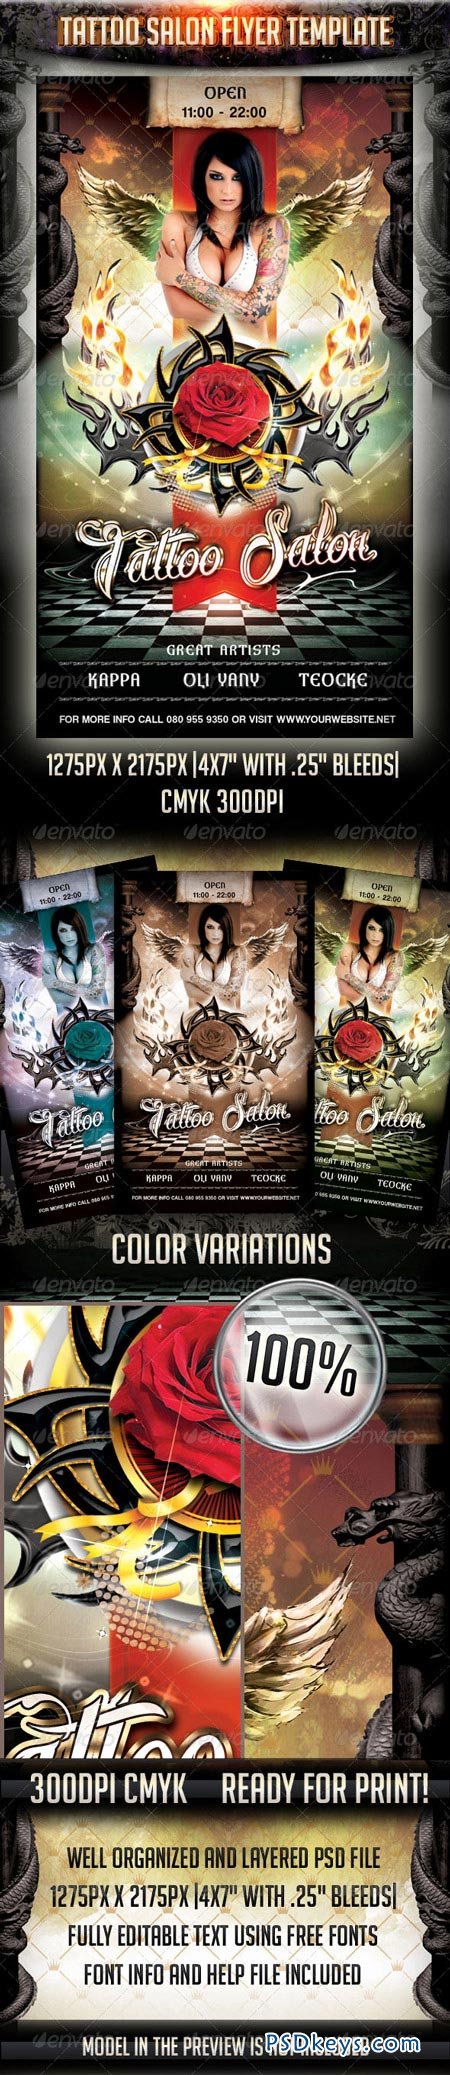 tattoo-salon-flyer-template-3192063-free-download-photoshop-vector